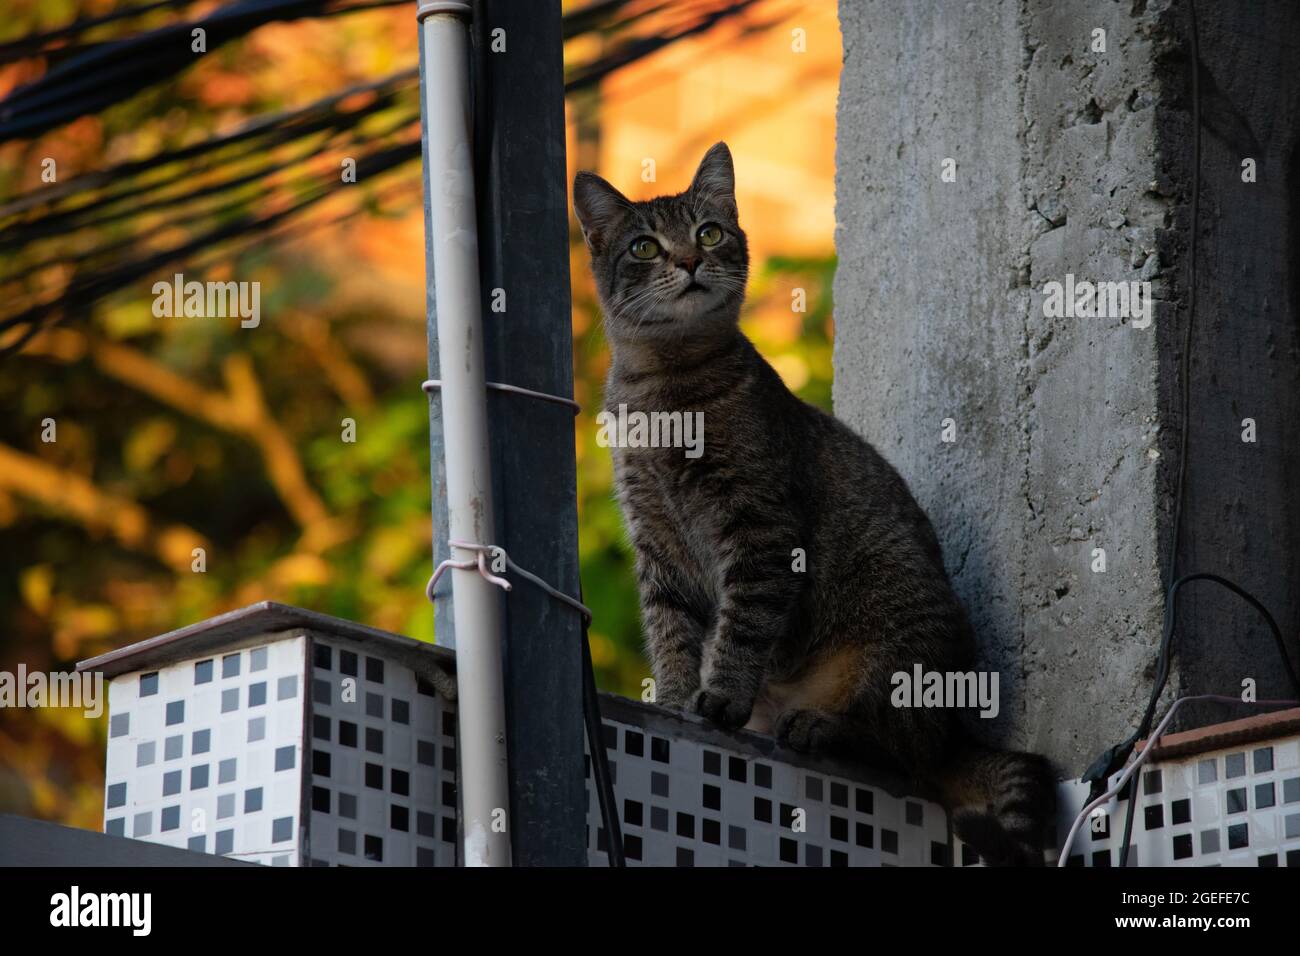 Cute look of a domestic cat (pet) in an everyday situation Stock Photo